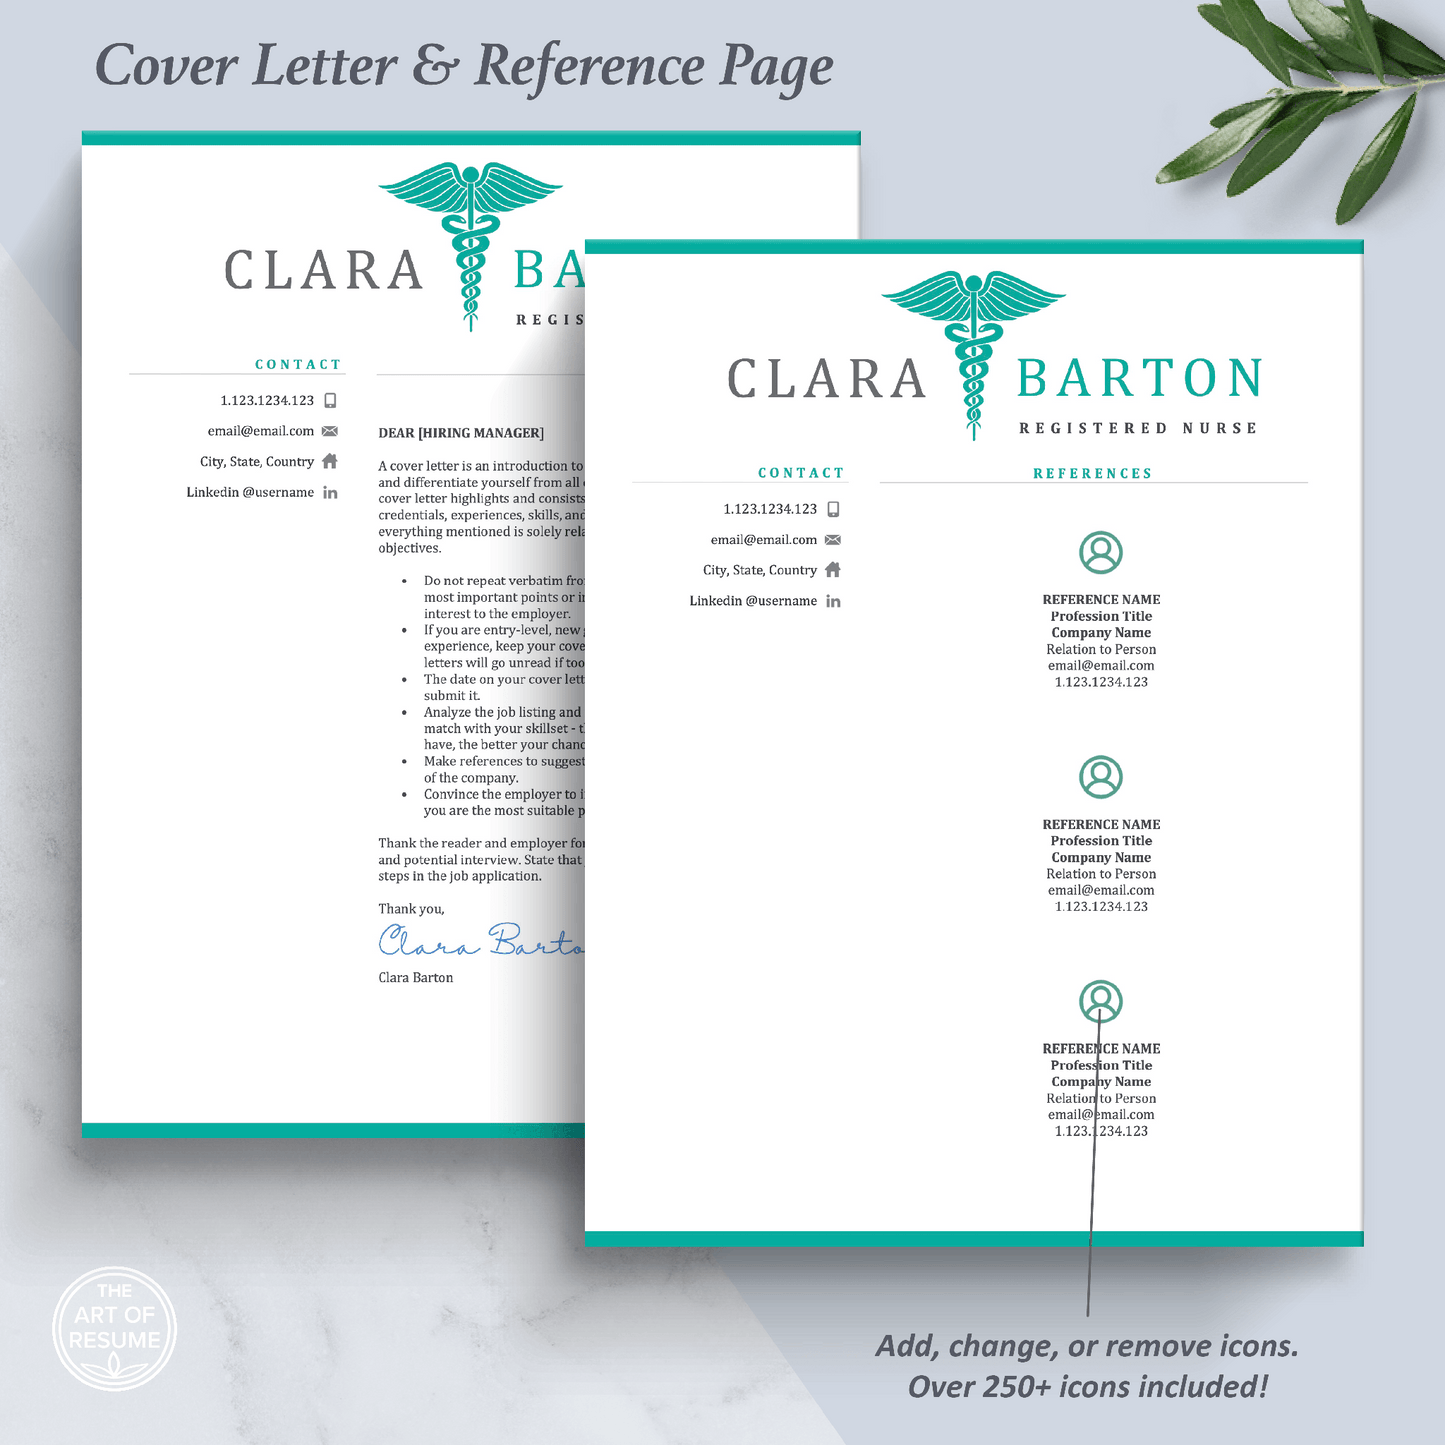 The Art of Resume Templates | Professional Nurse Doctor Medical Cover Letter and Reference Page Design Templates Instant Download